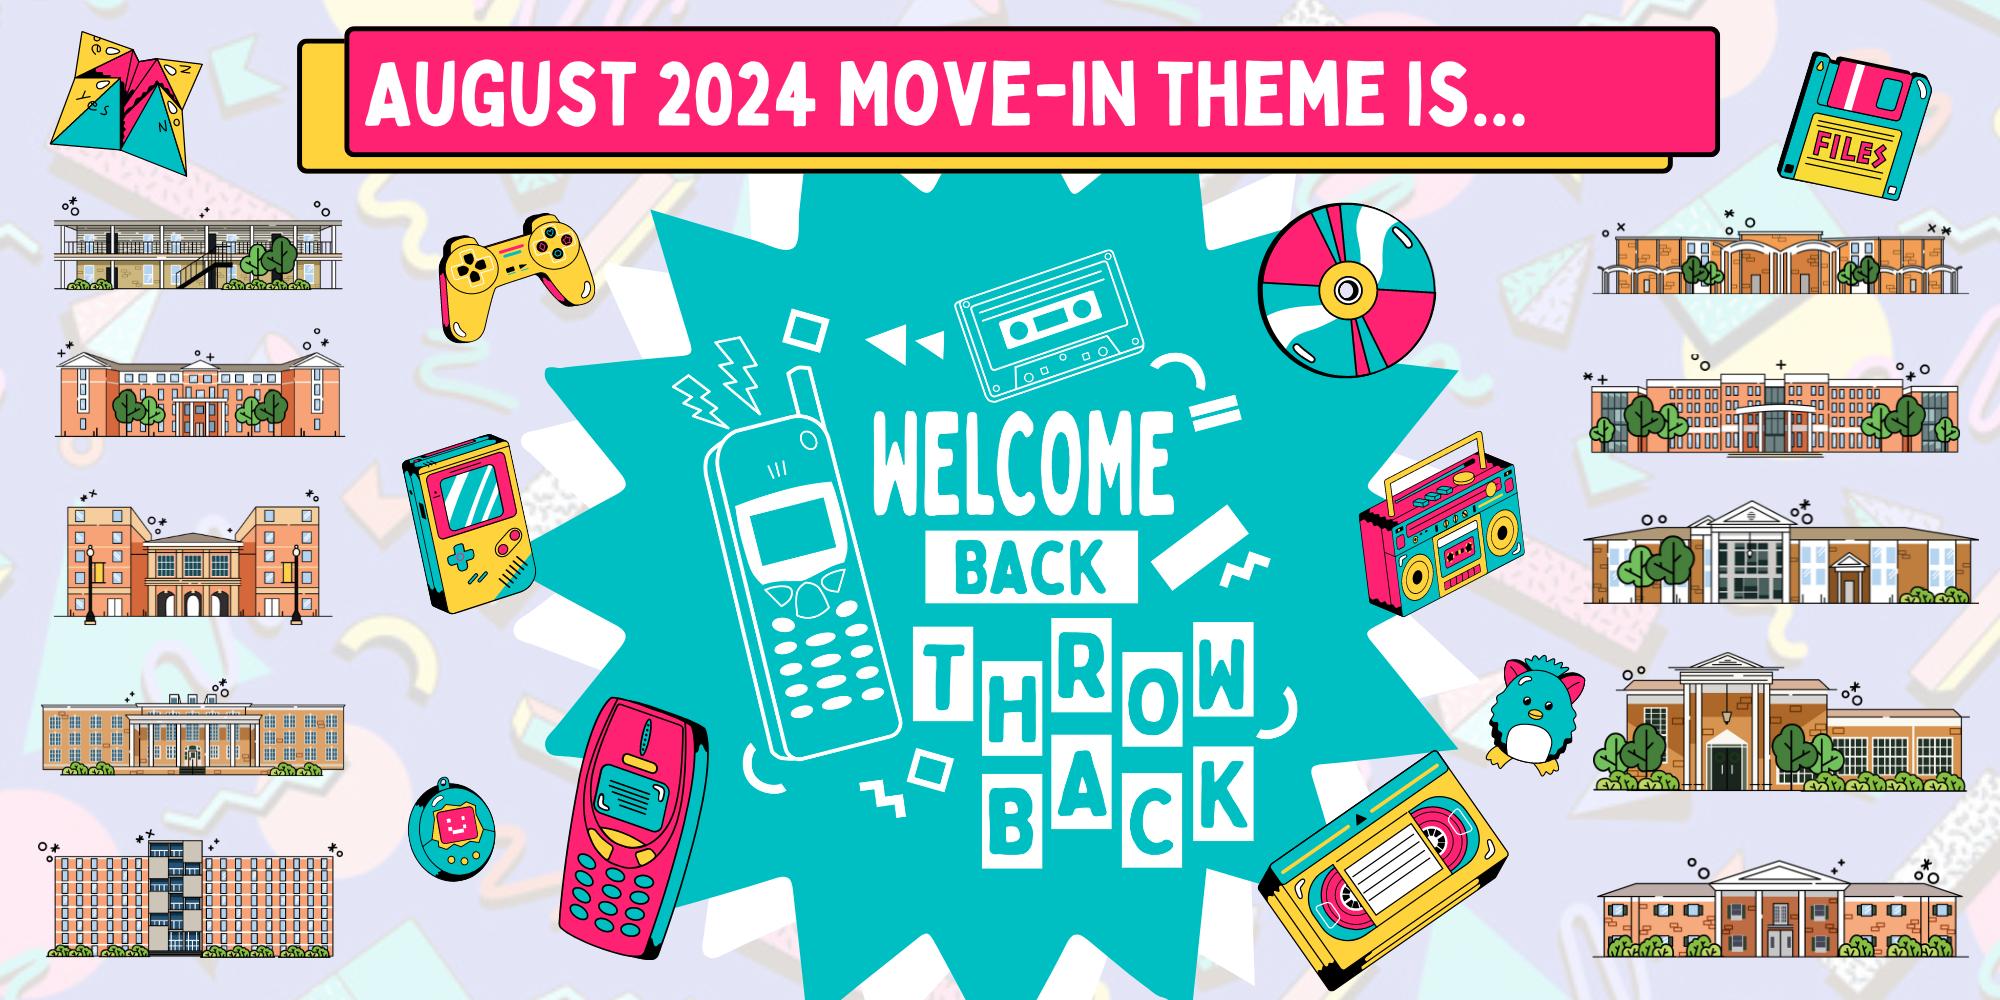 August 2024 Move-In Theme